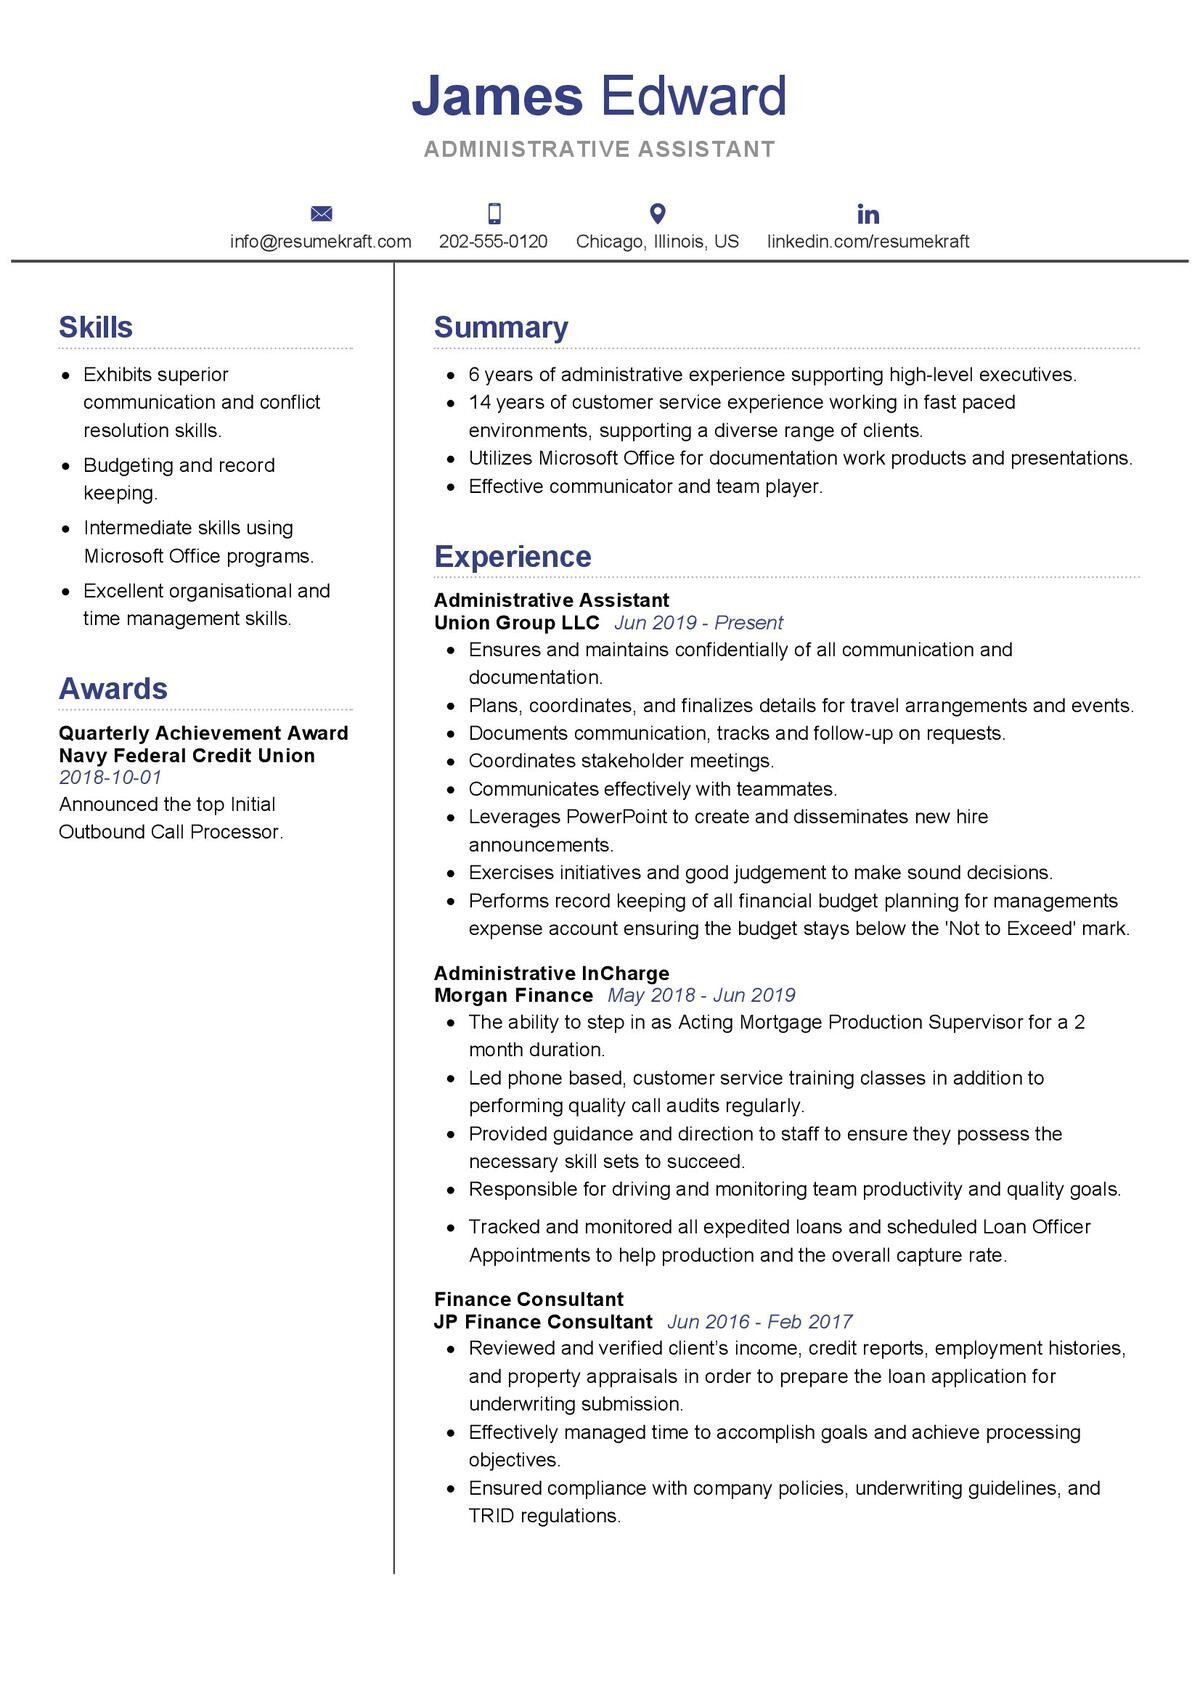 Resume Sample for Office assistant Position Administrative assistant Resume Sample 2021 Writing Guide …